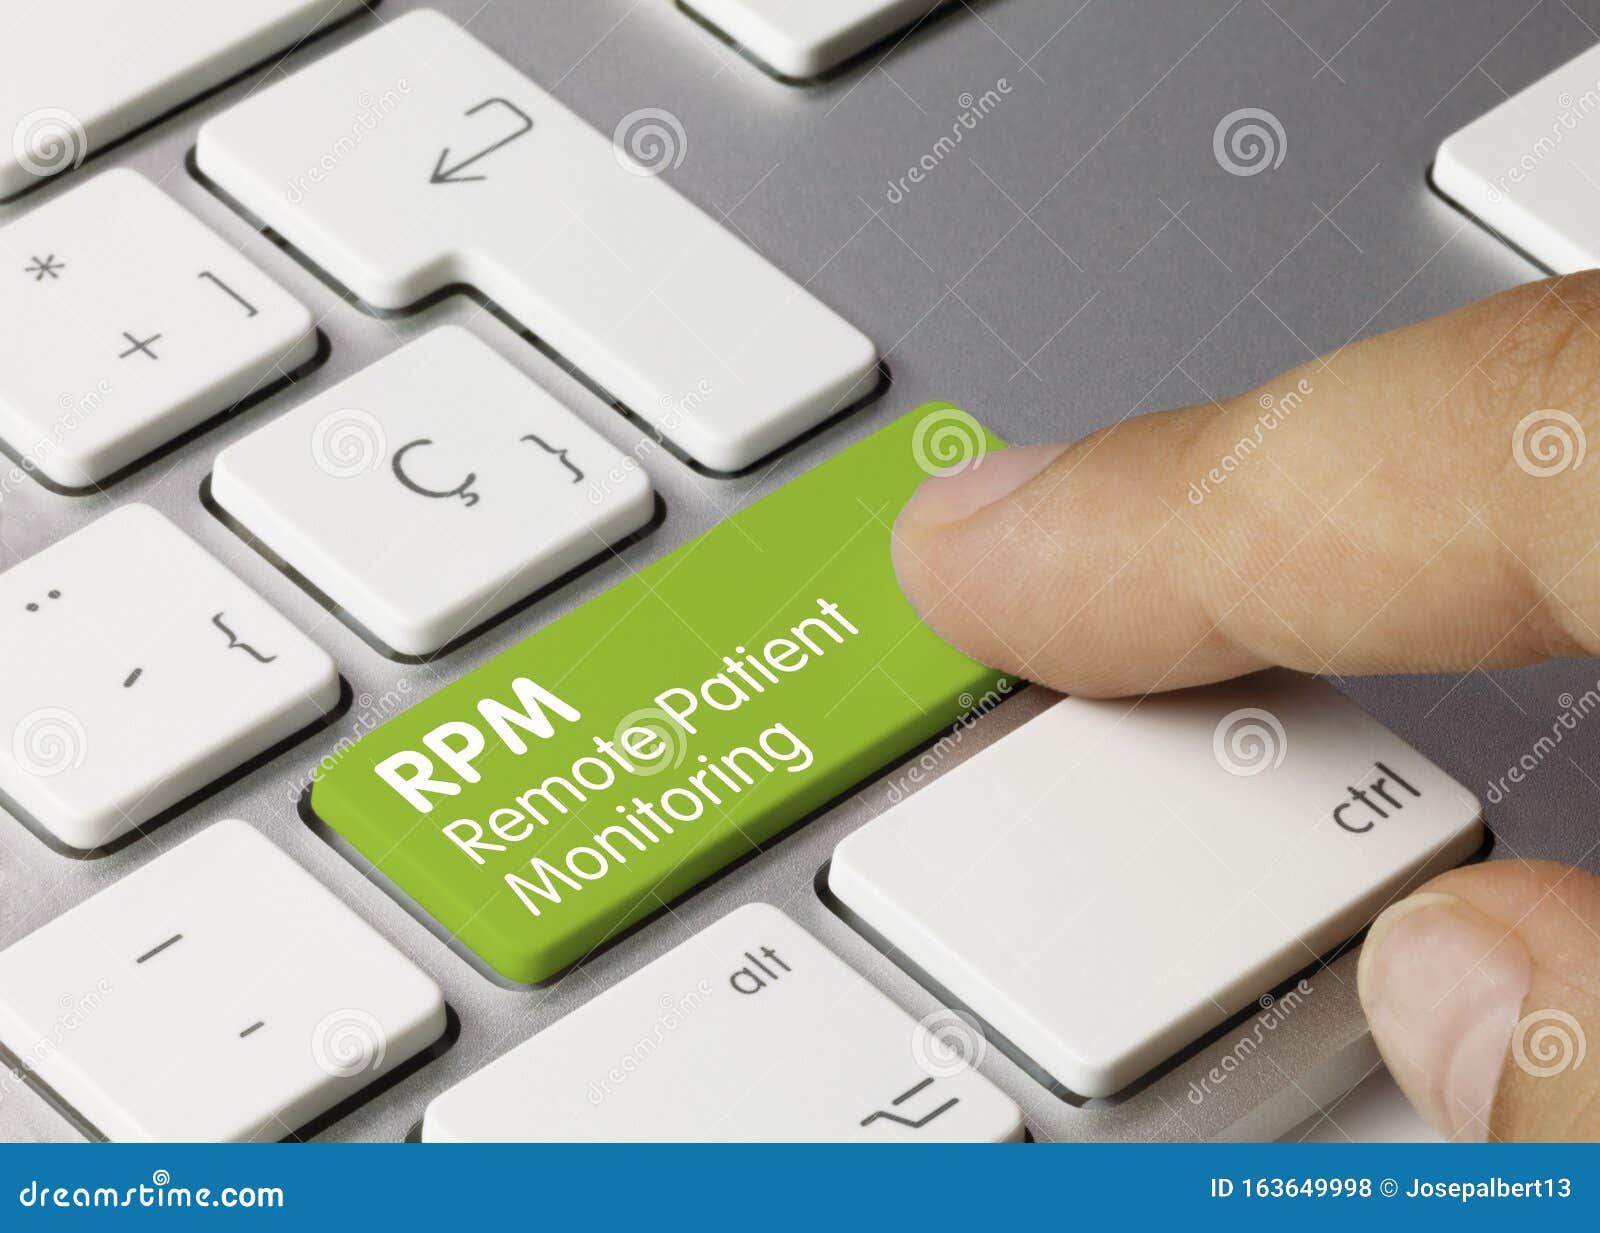 rpm remote patient monitoring - inscription on green keyboard key